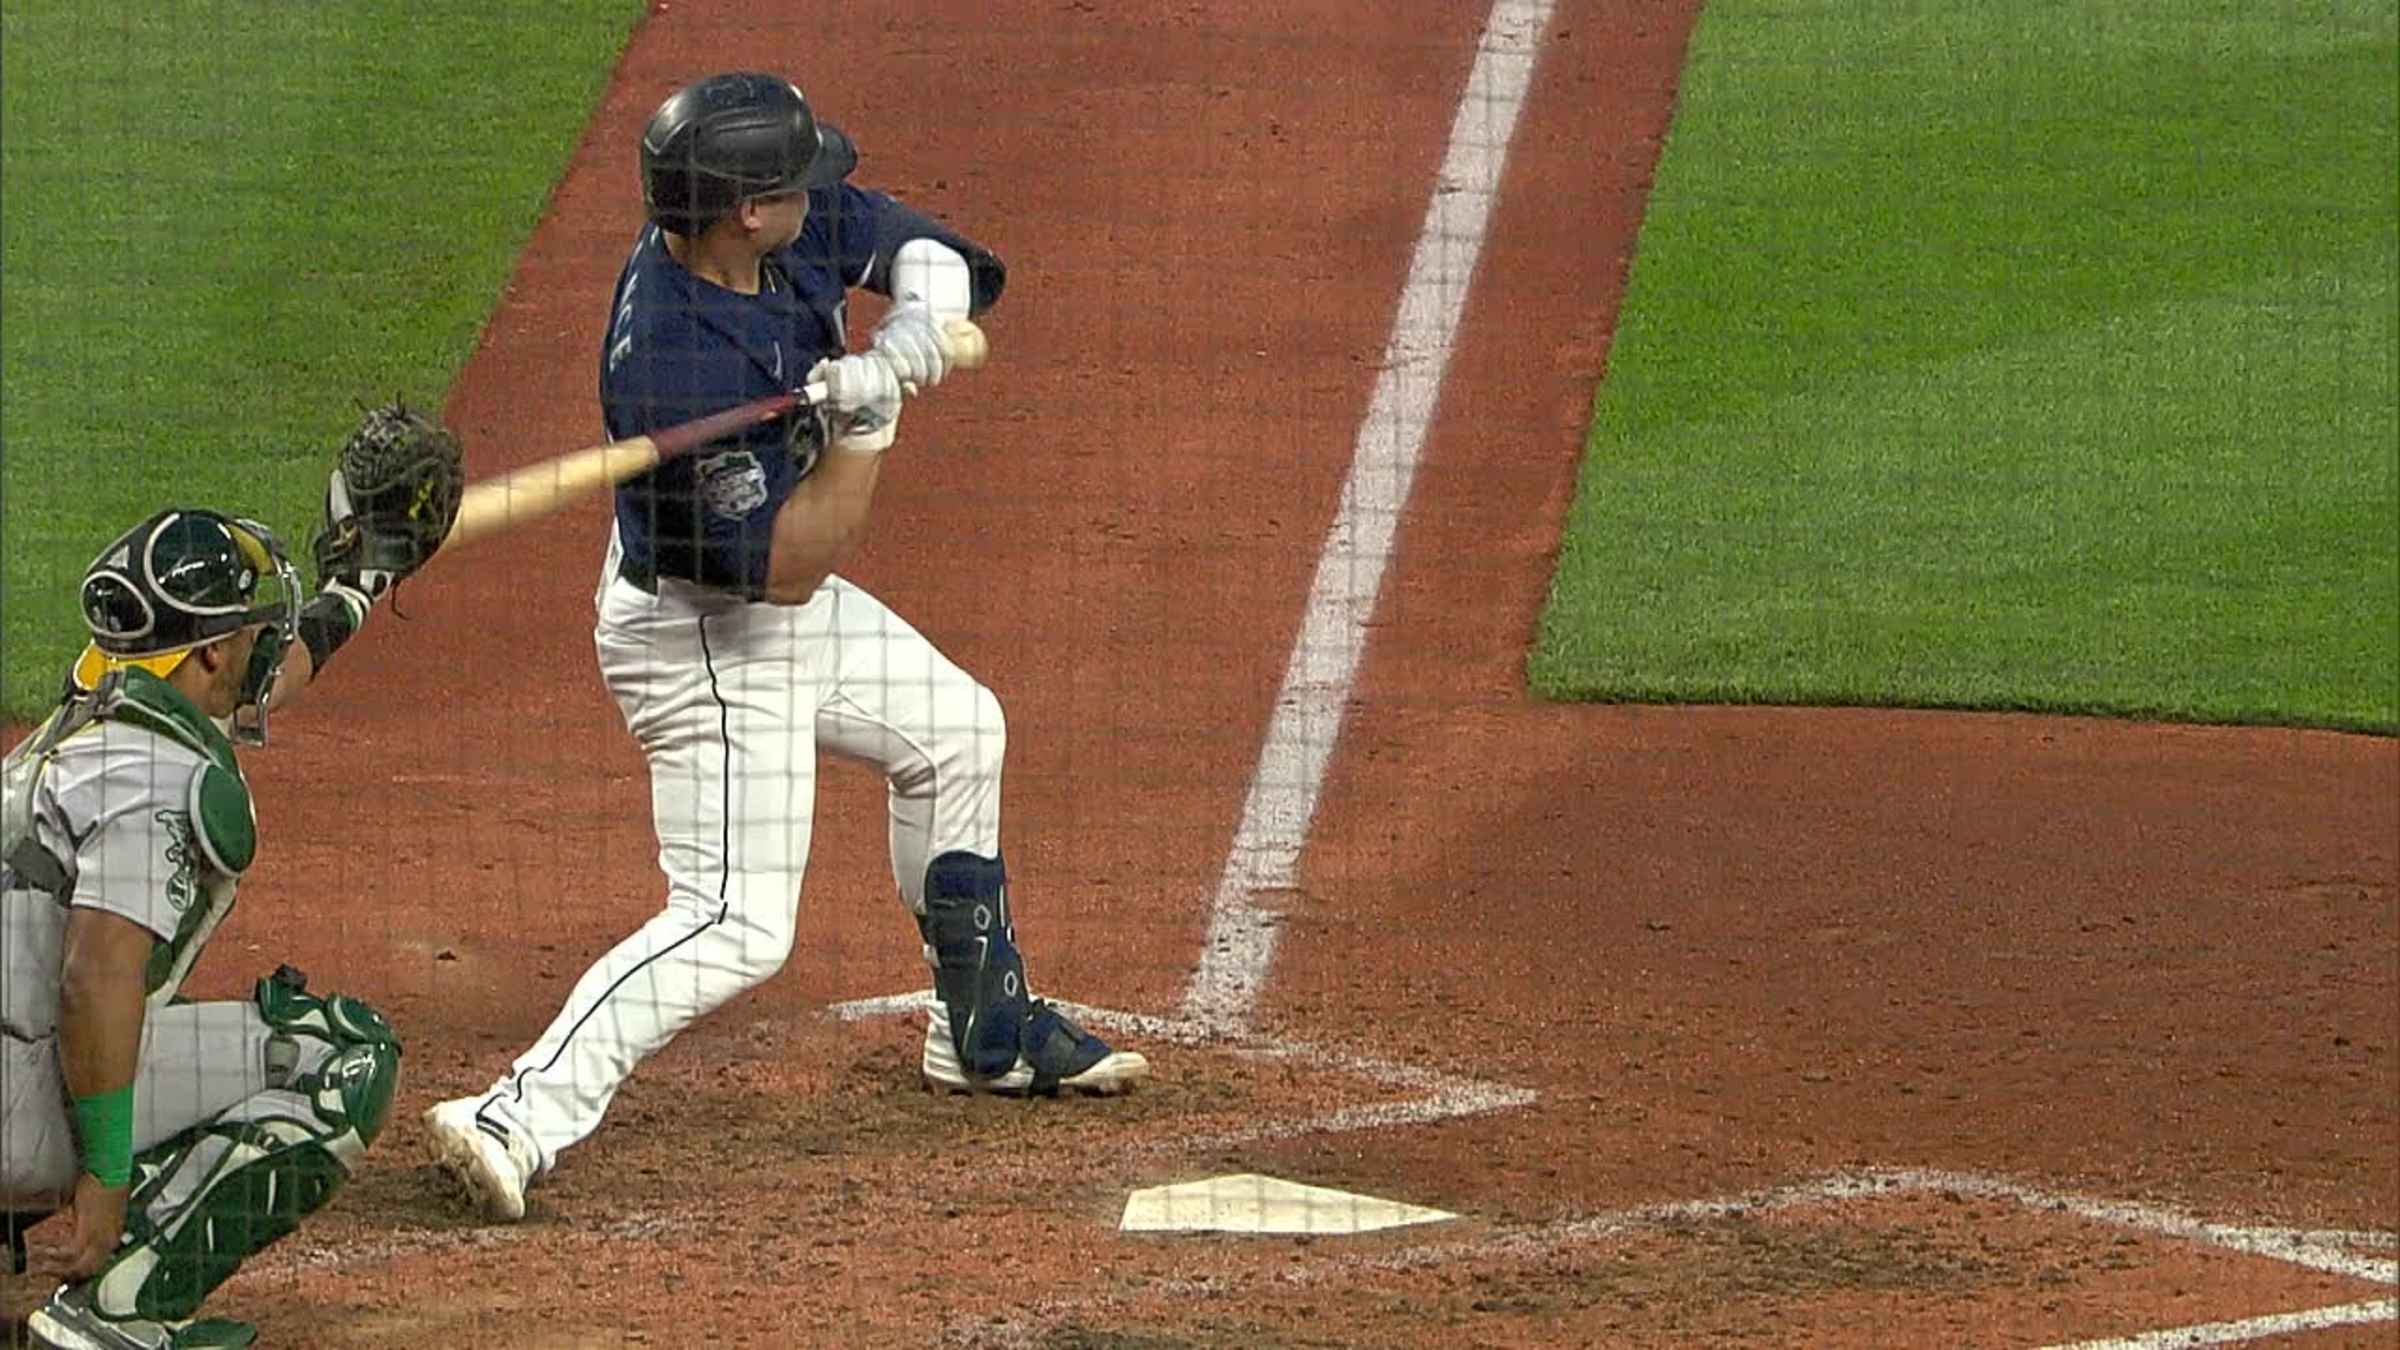 Ty France hit by pitch., 04/19/2021